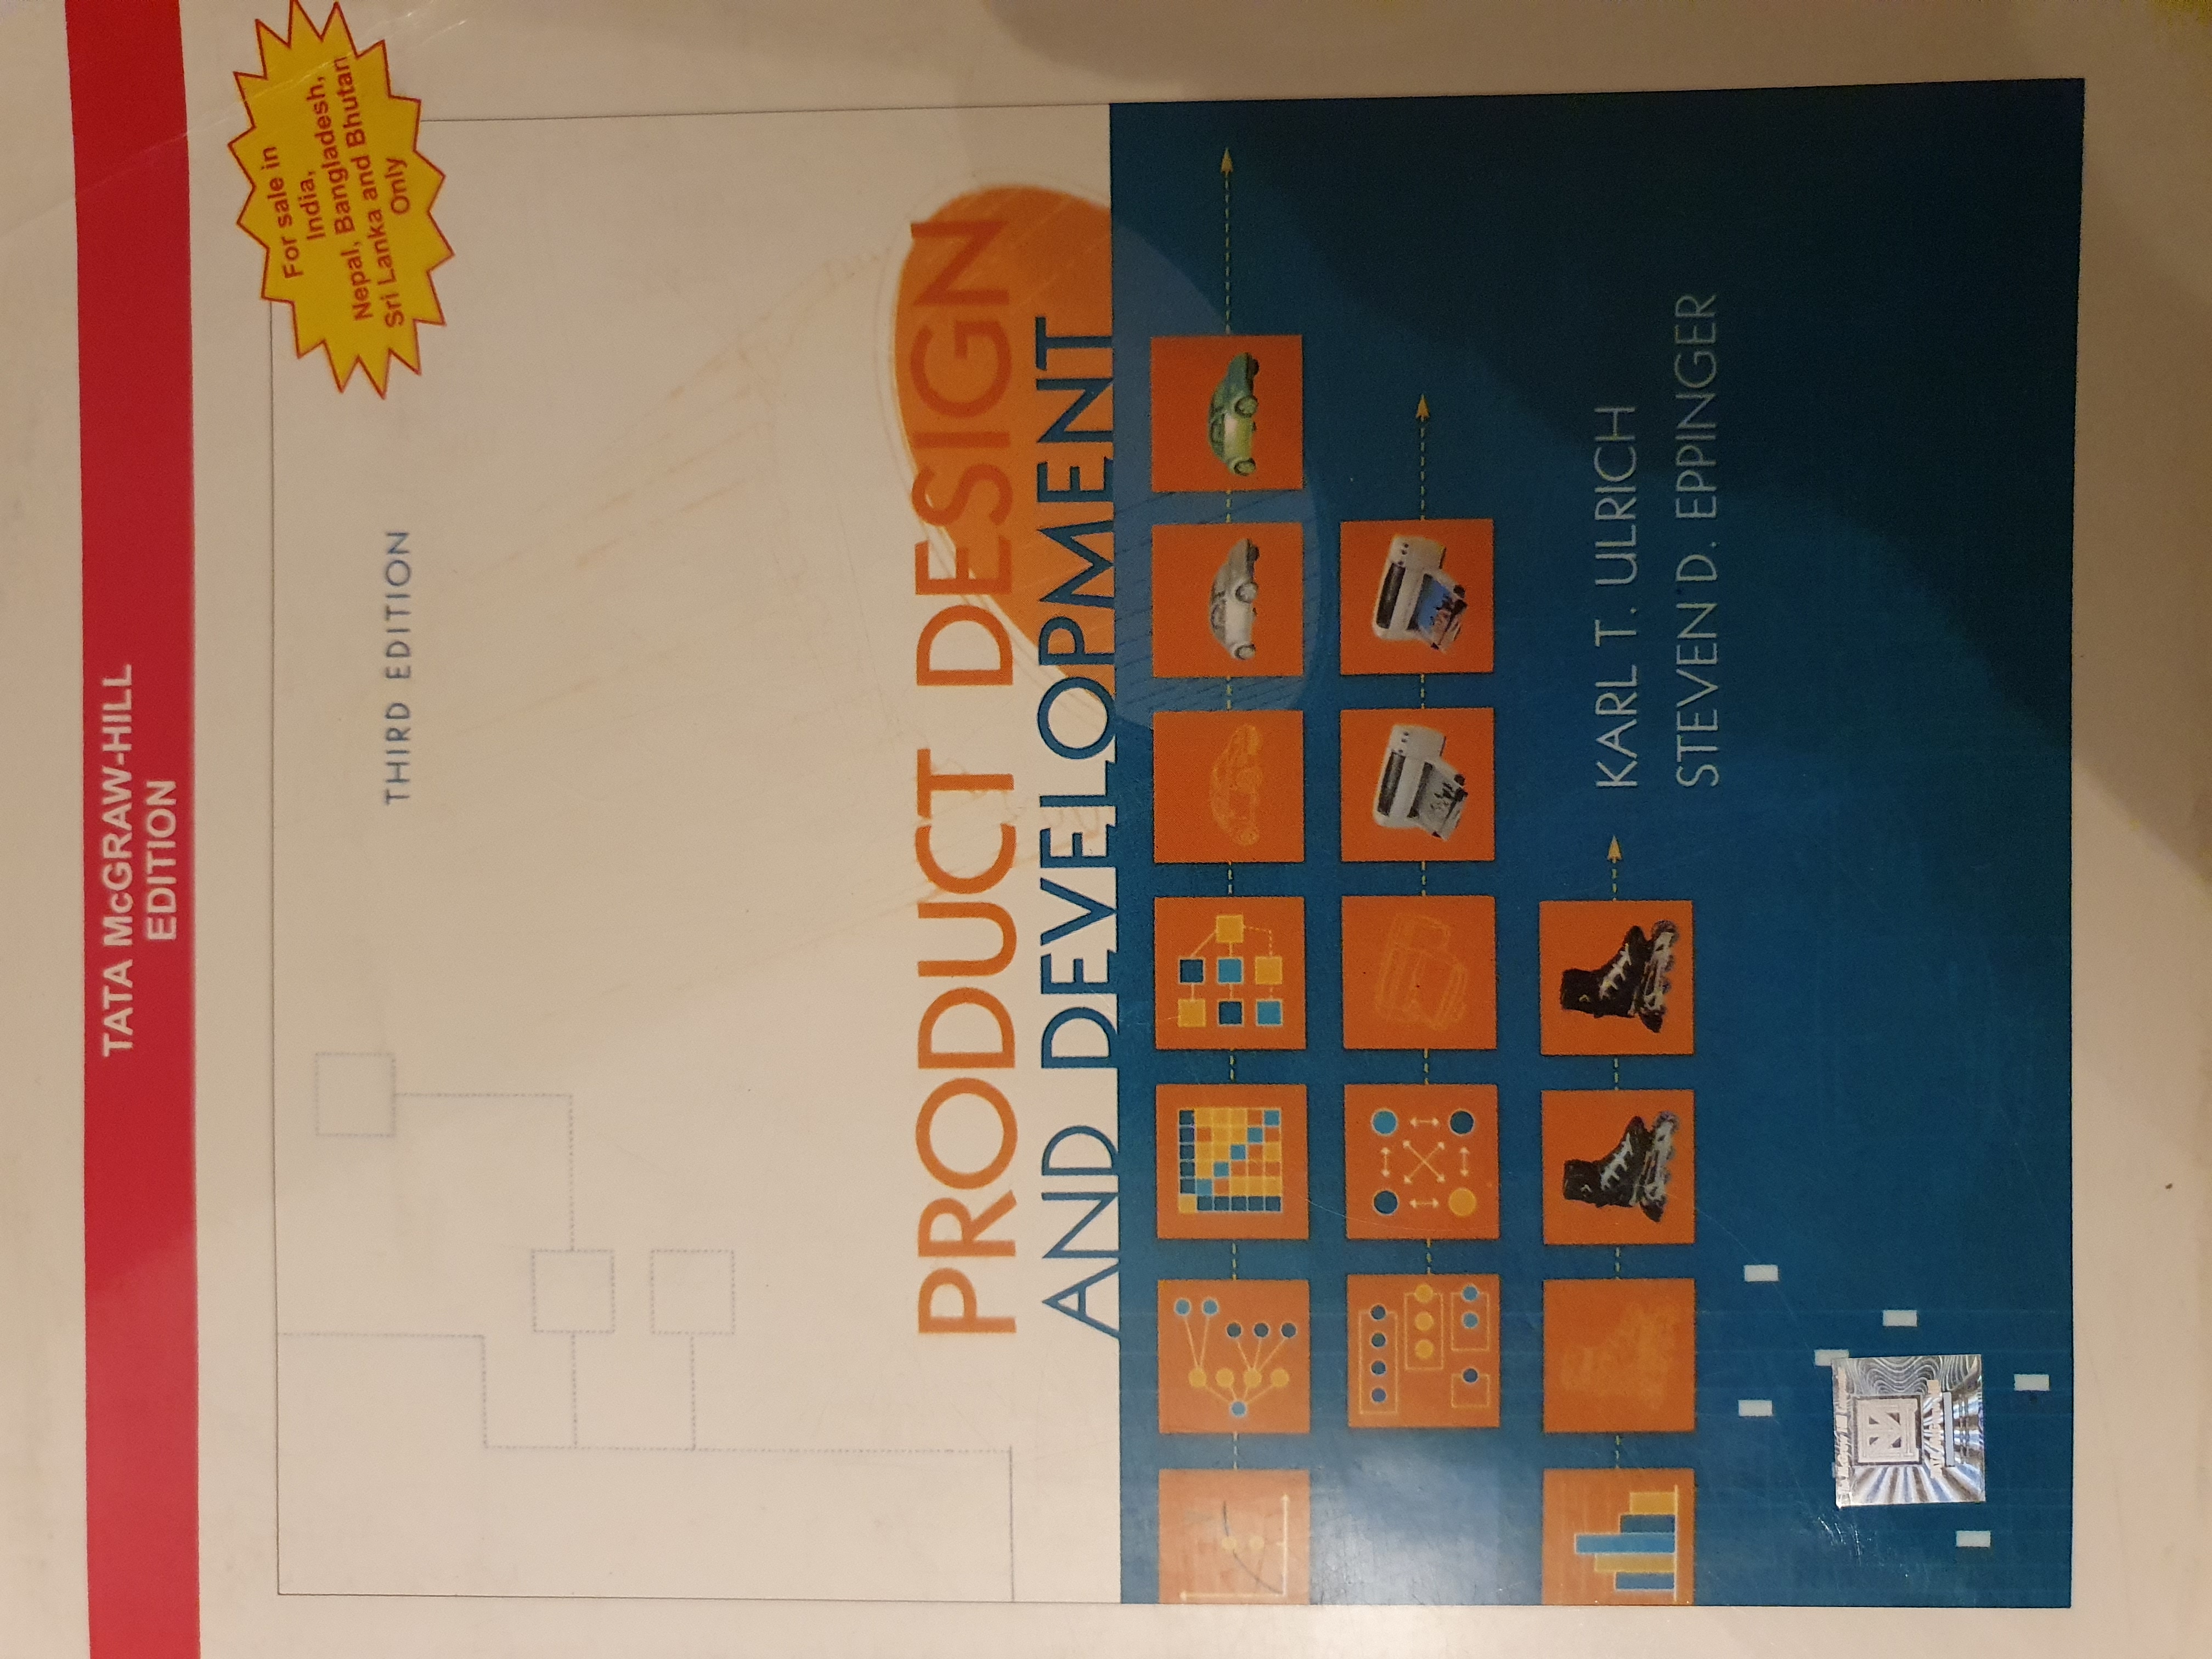 Product design and development ; Karl T ulrich; 2006